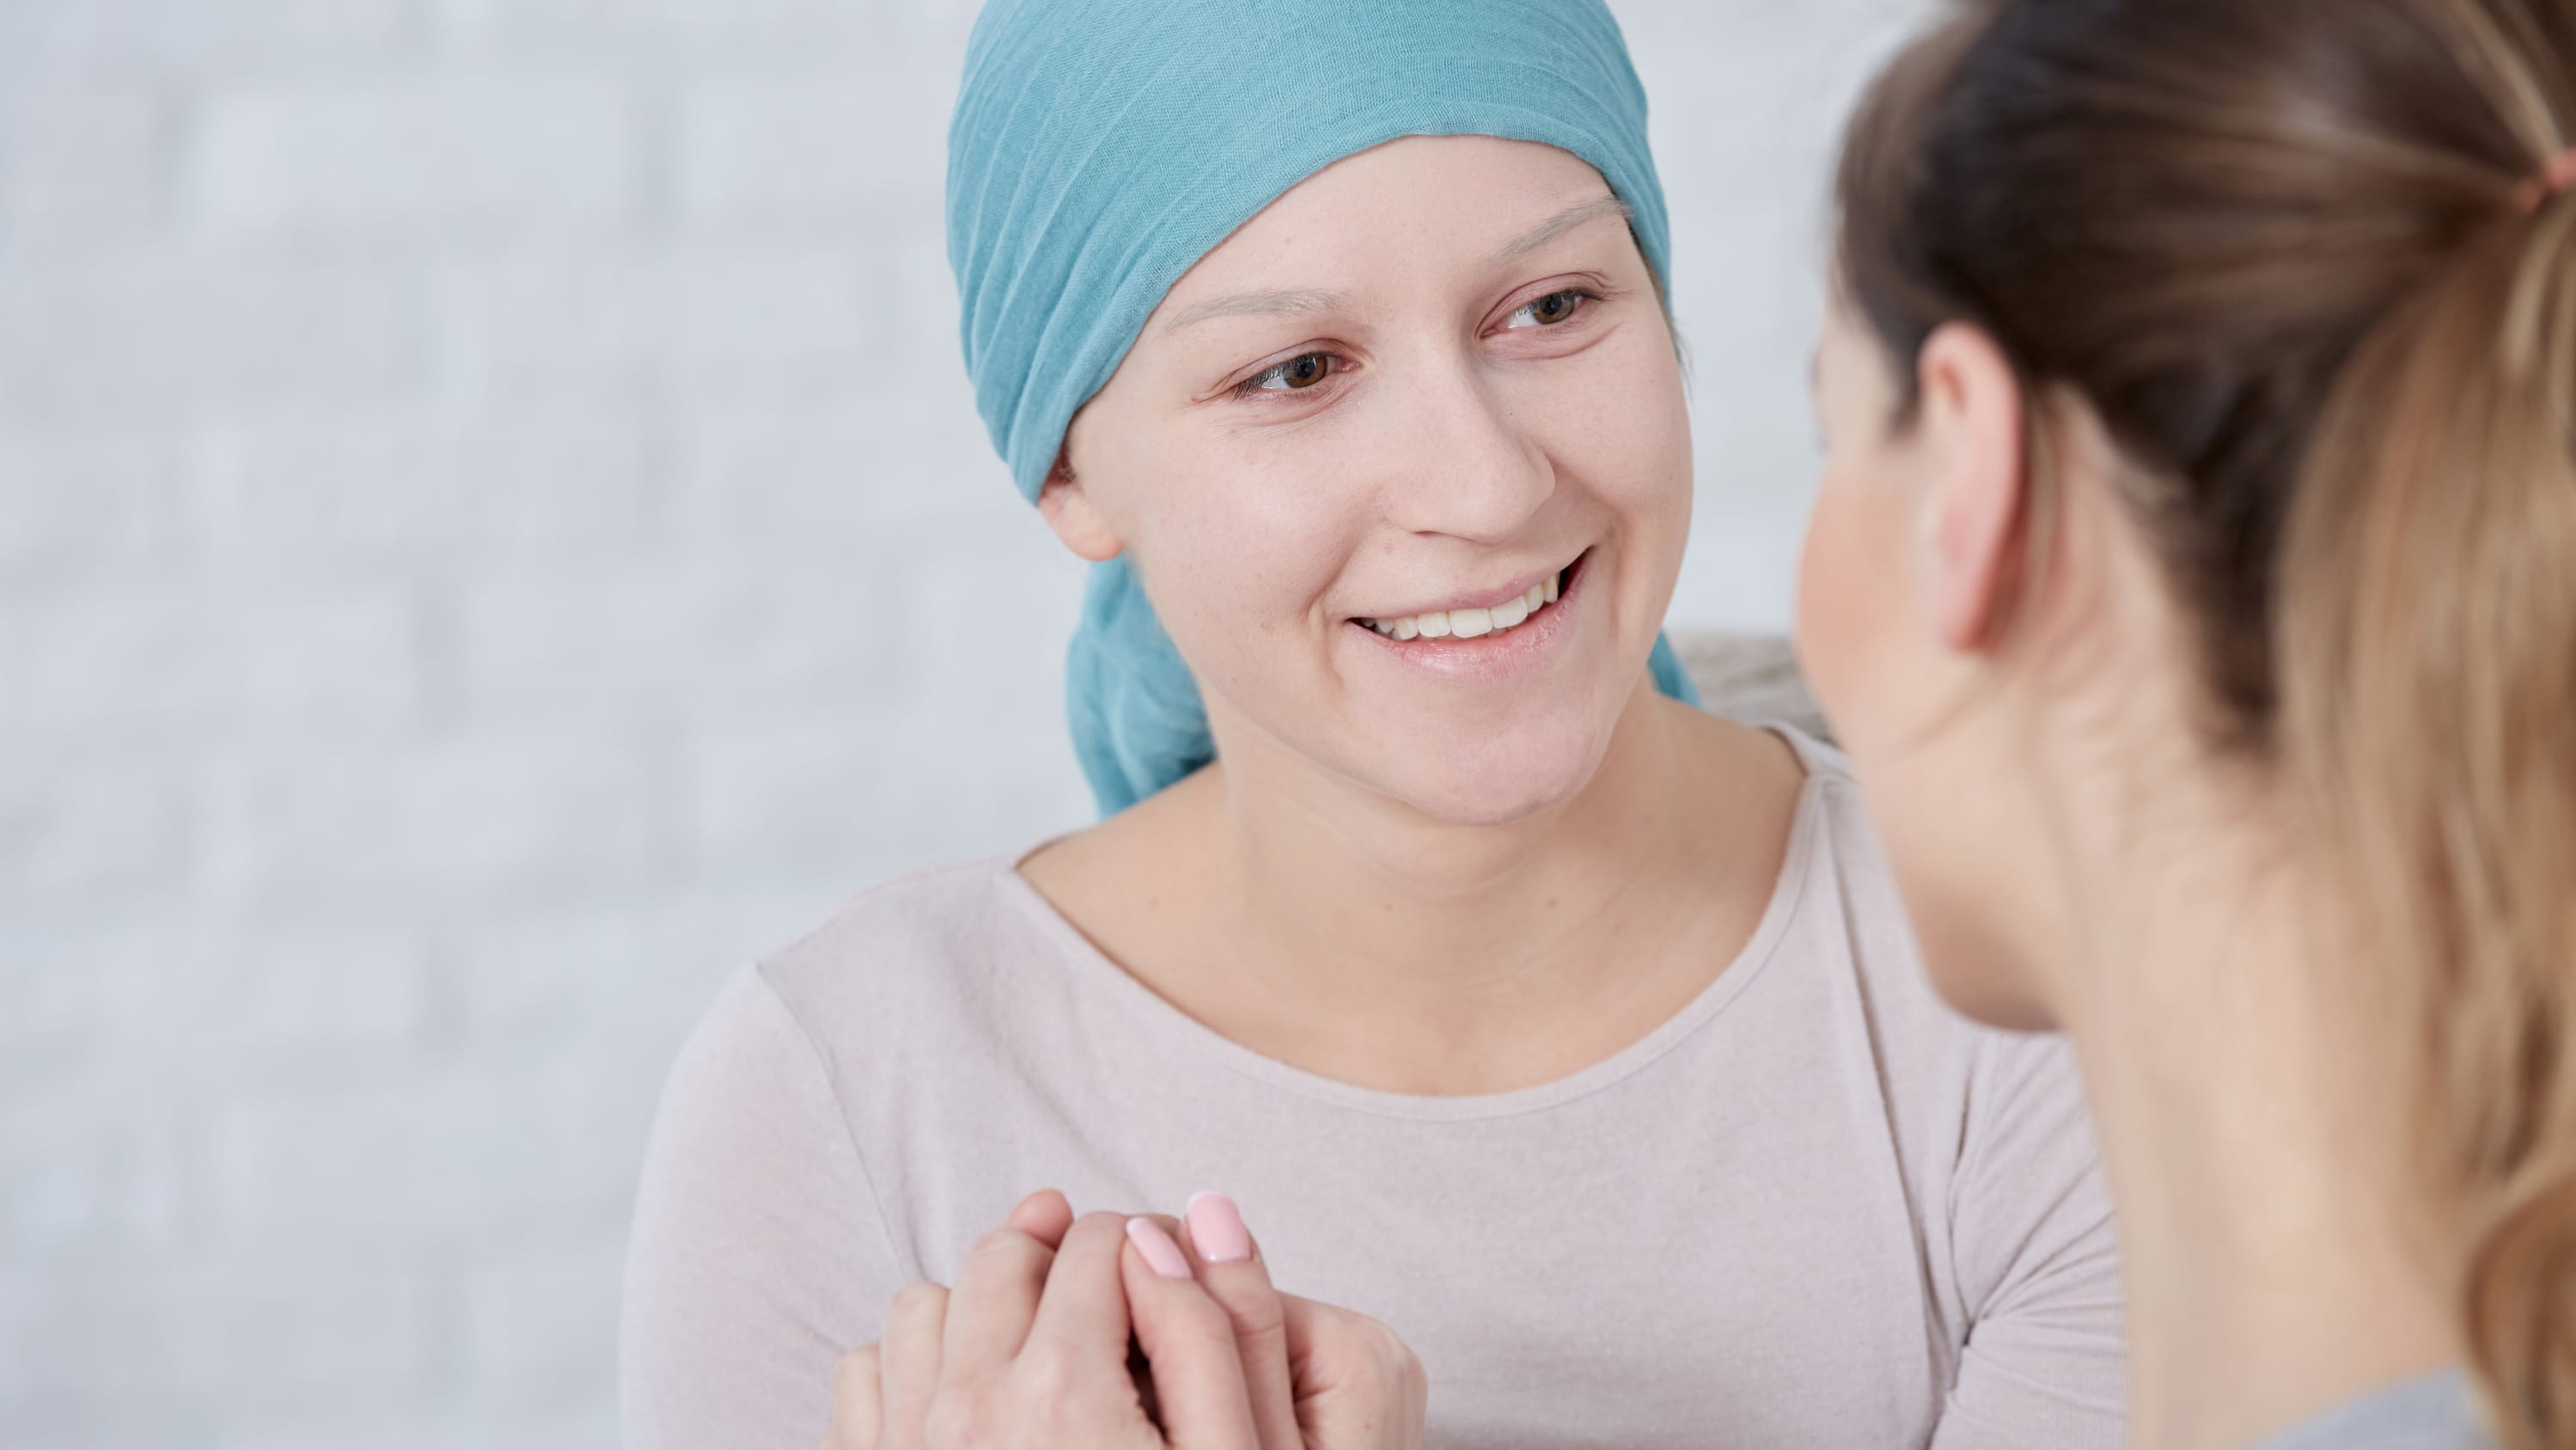 A woman in a head wrap smiles as she converses with a woman with a pony tail.